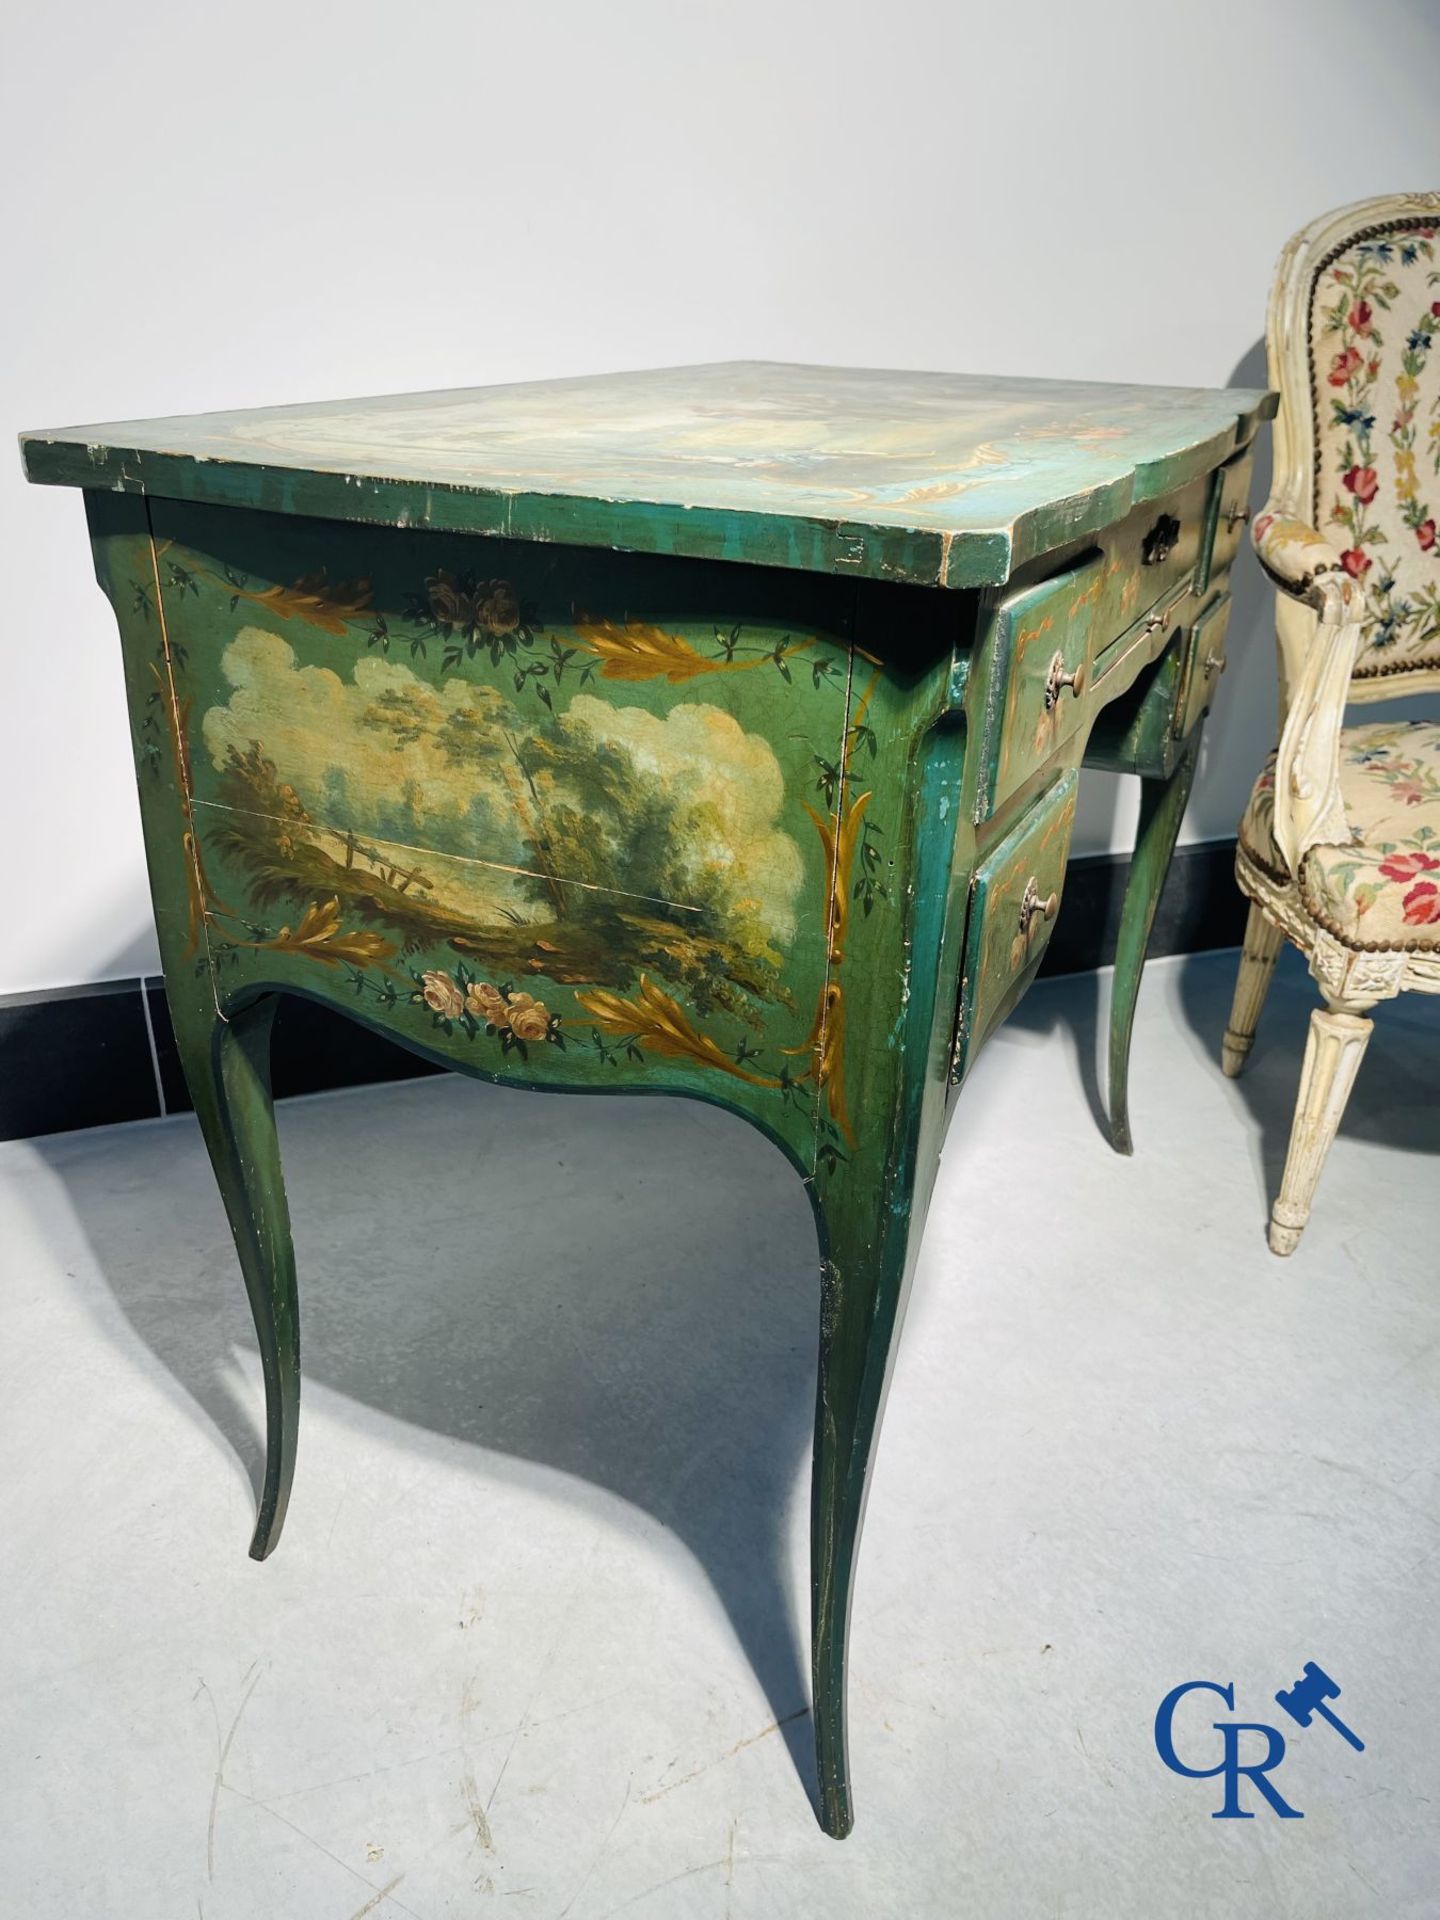 Ladies dressing table with gallant paintings, and a lacquered armchair transitional period Louis XV  - Image 9 of 17